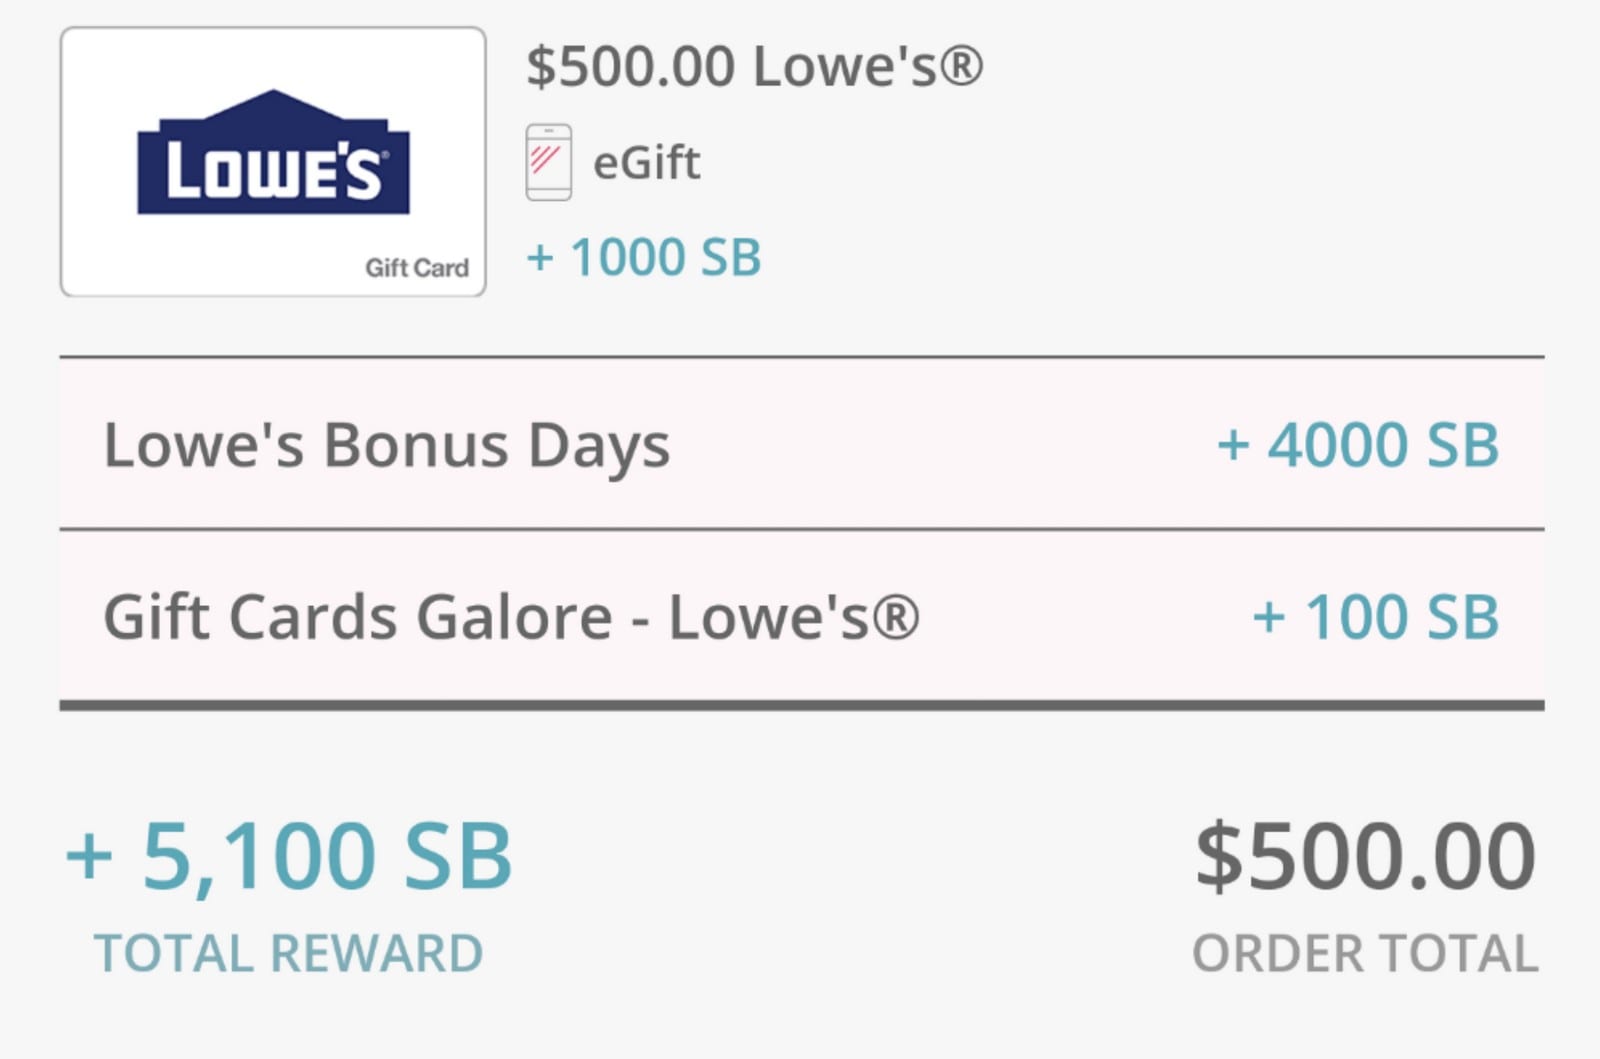 [Expired] Swagbucks: Creative Bug $10 Back with $1 Subscription [$9 MM]